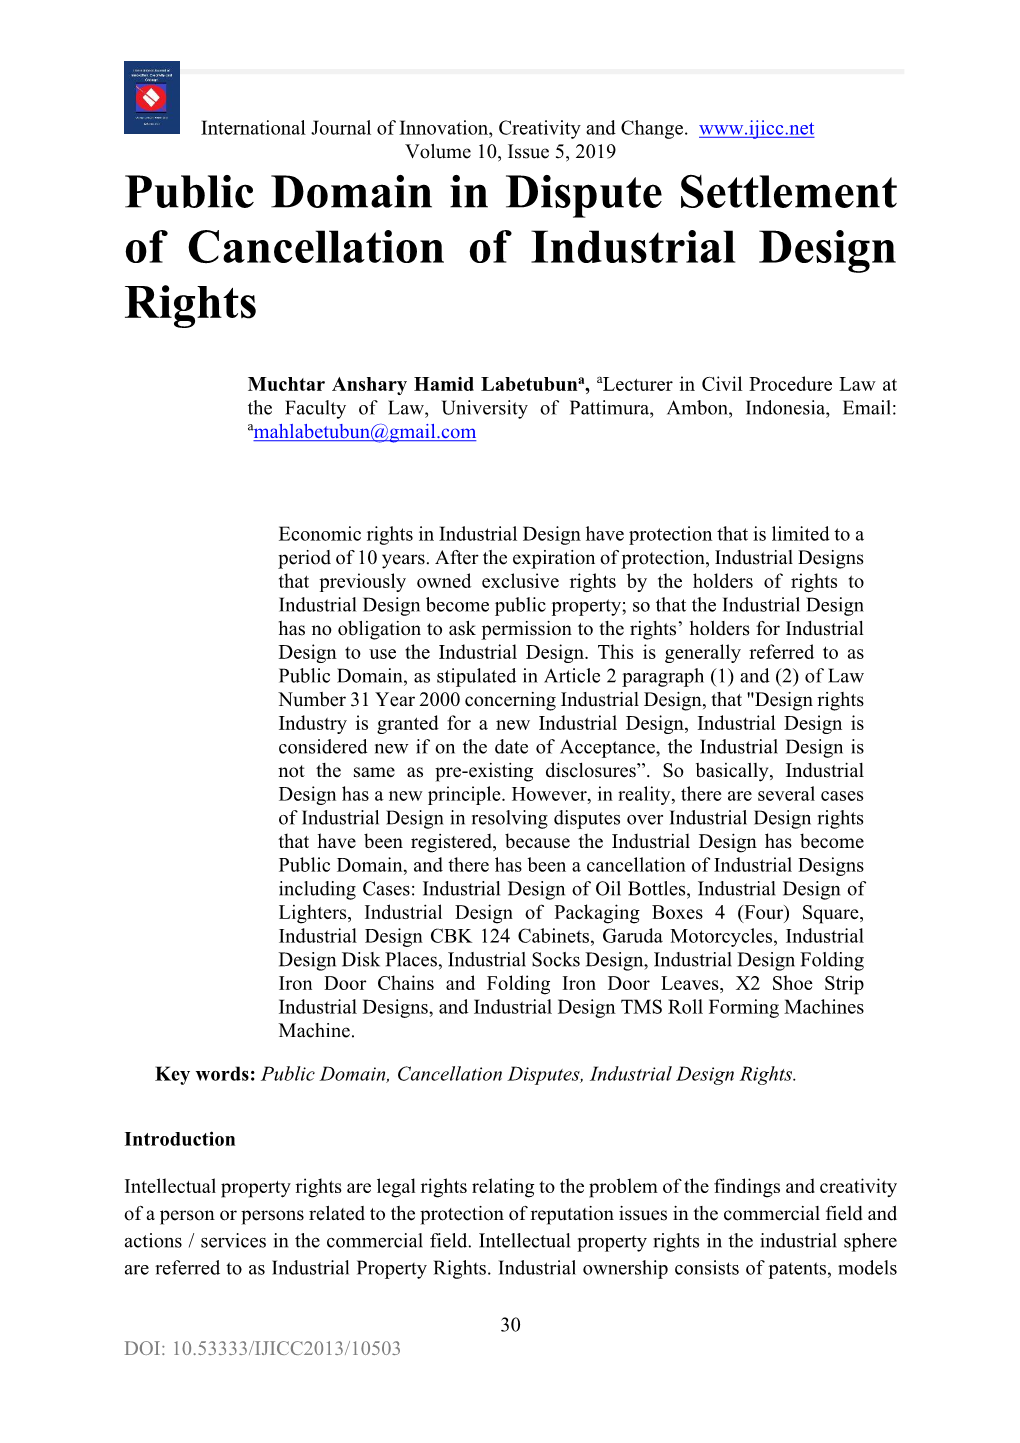 Public Domain in Dispute Settlement of Cancellation of Industrial Design Rights